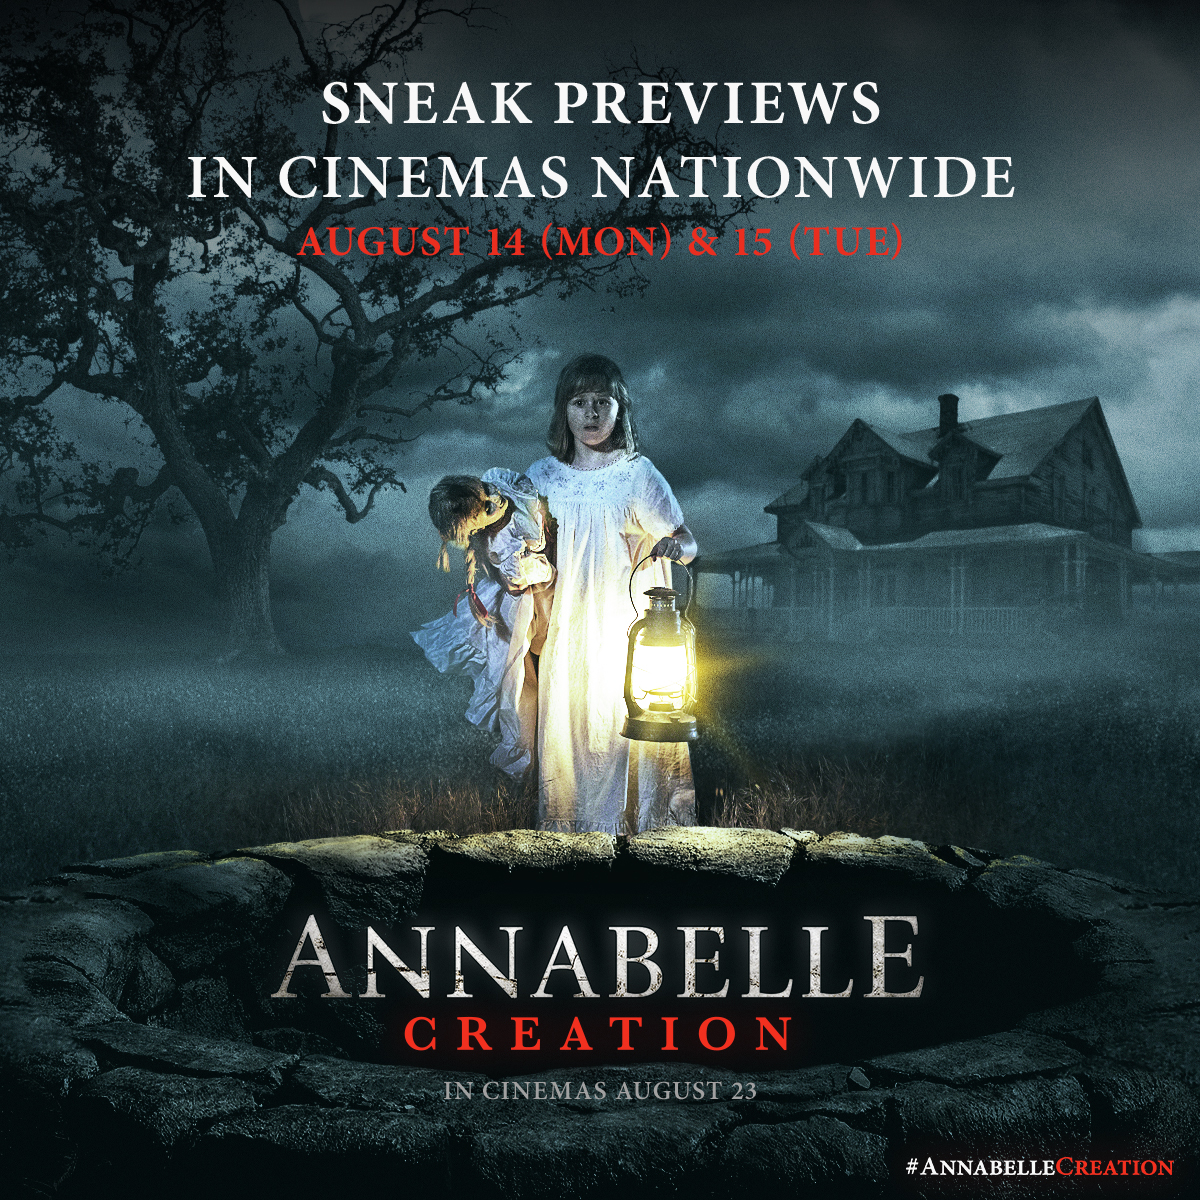 "Annabelle Creation" Arrives a Week Earlier in Special